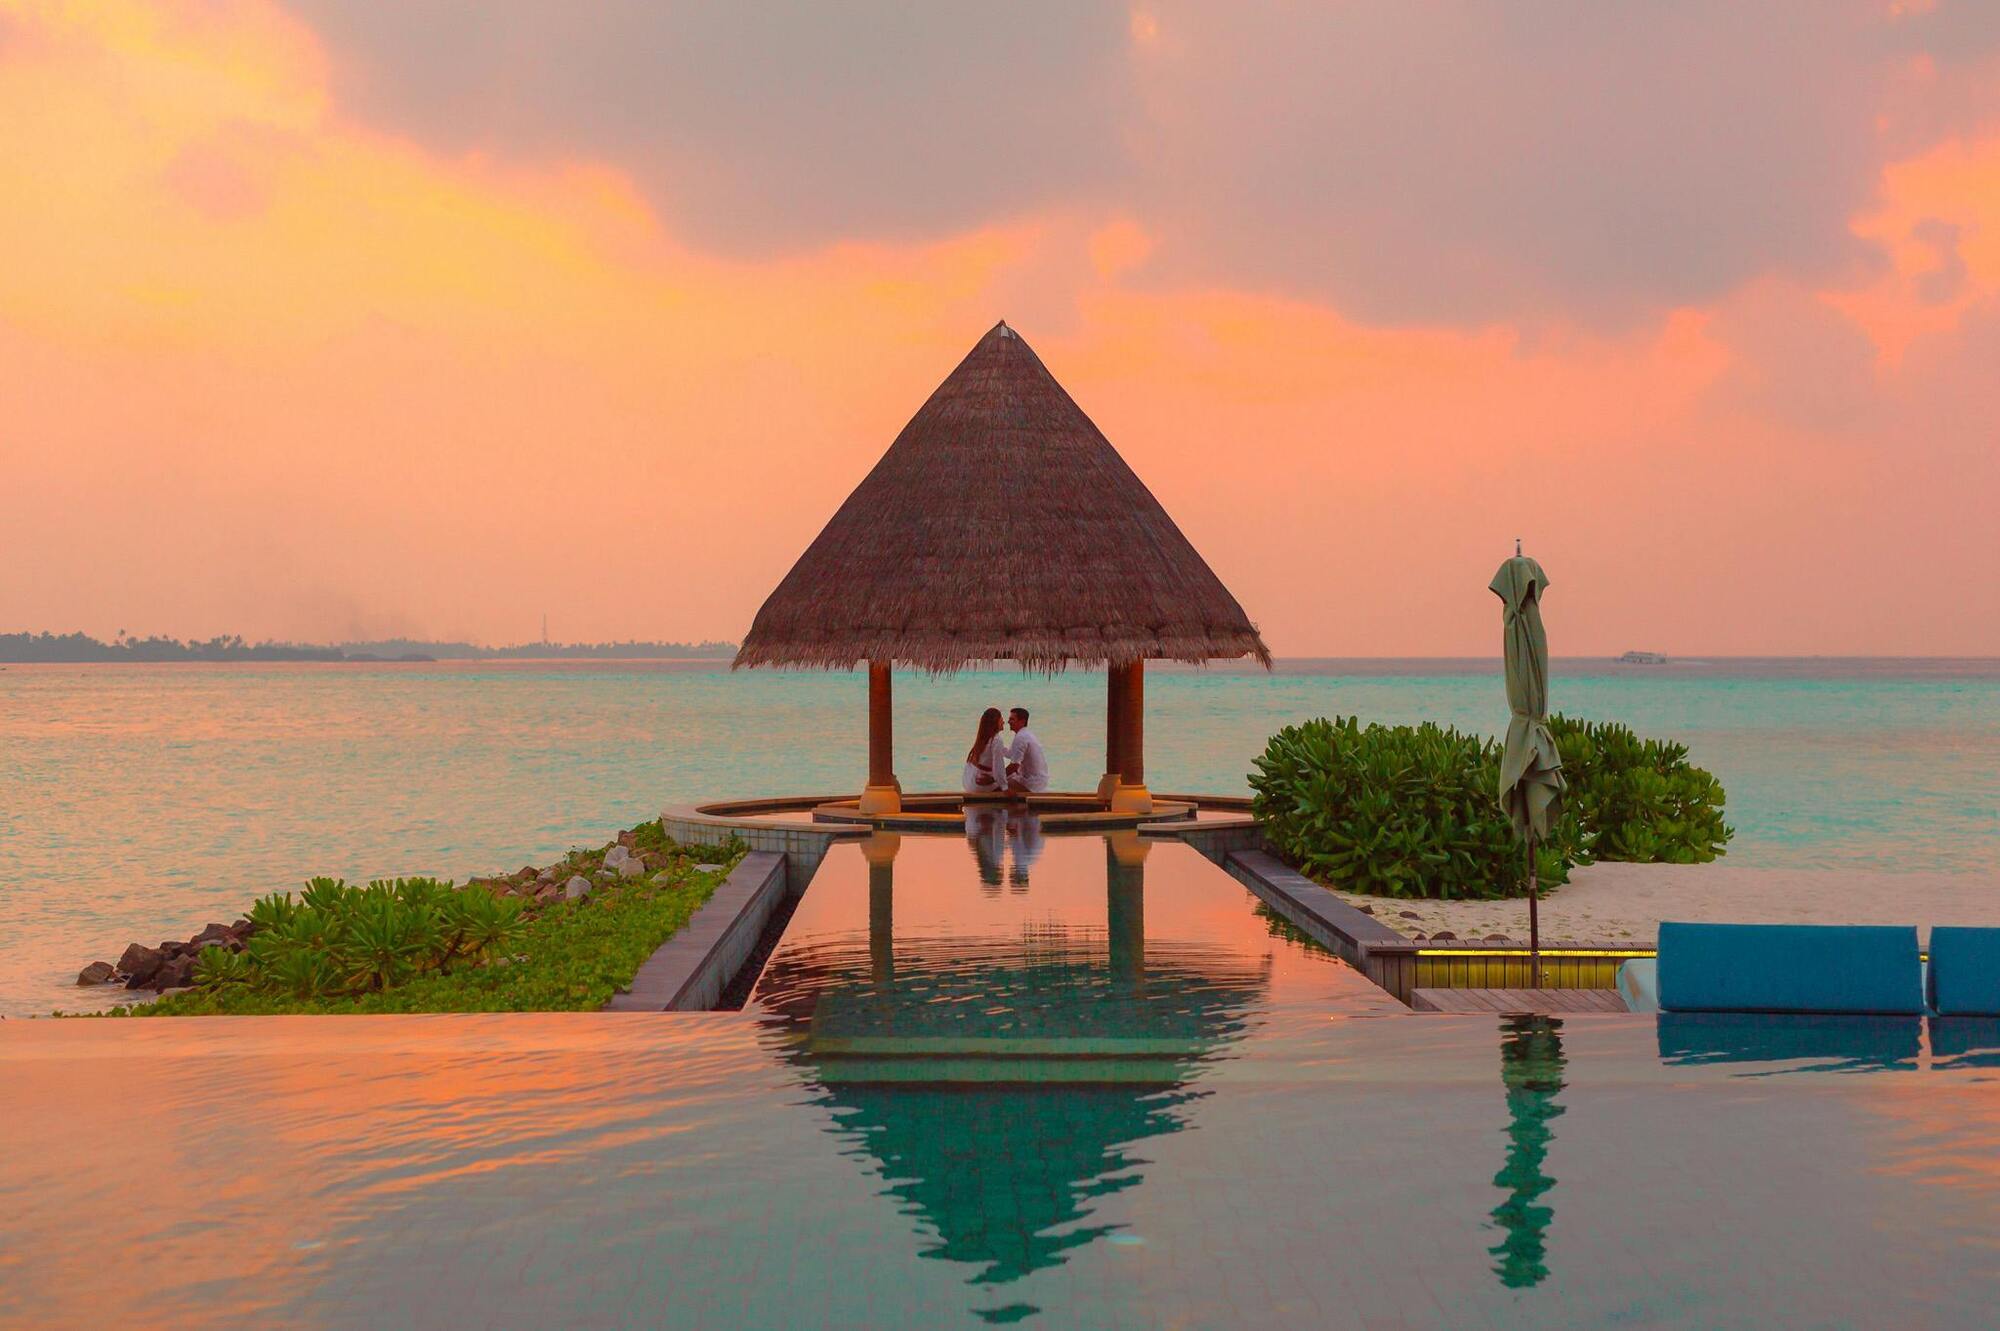 Top 15 Romantic Hotels for Couples Worldwide: Experience the magic of enchanting cuisine, exclusive service, and captivating landscapes